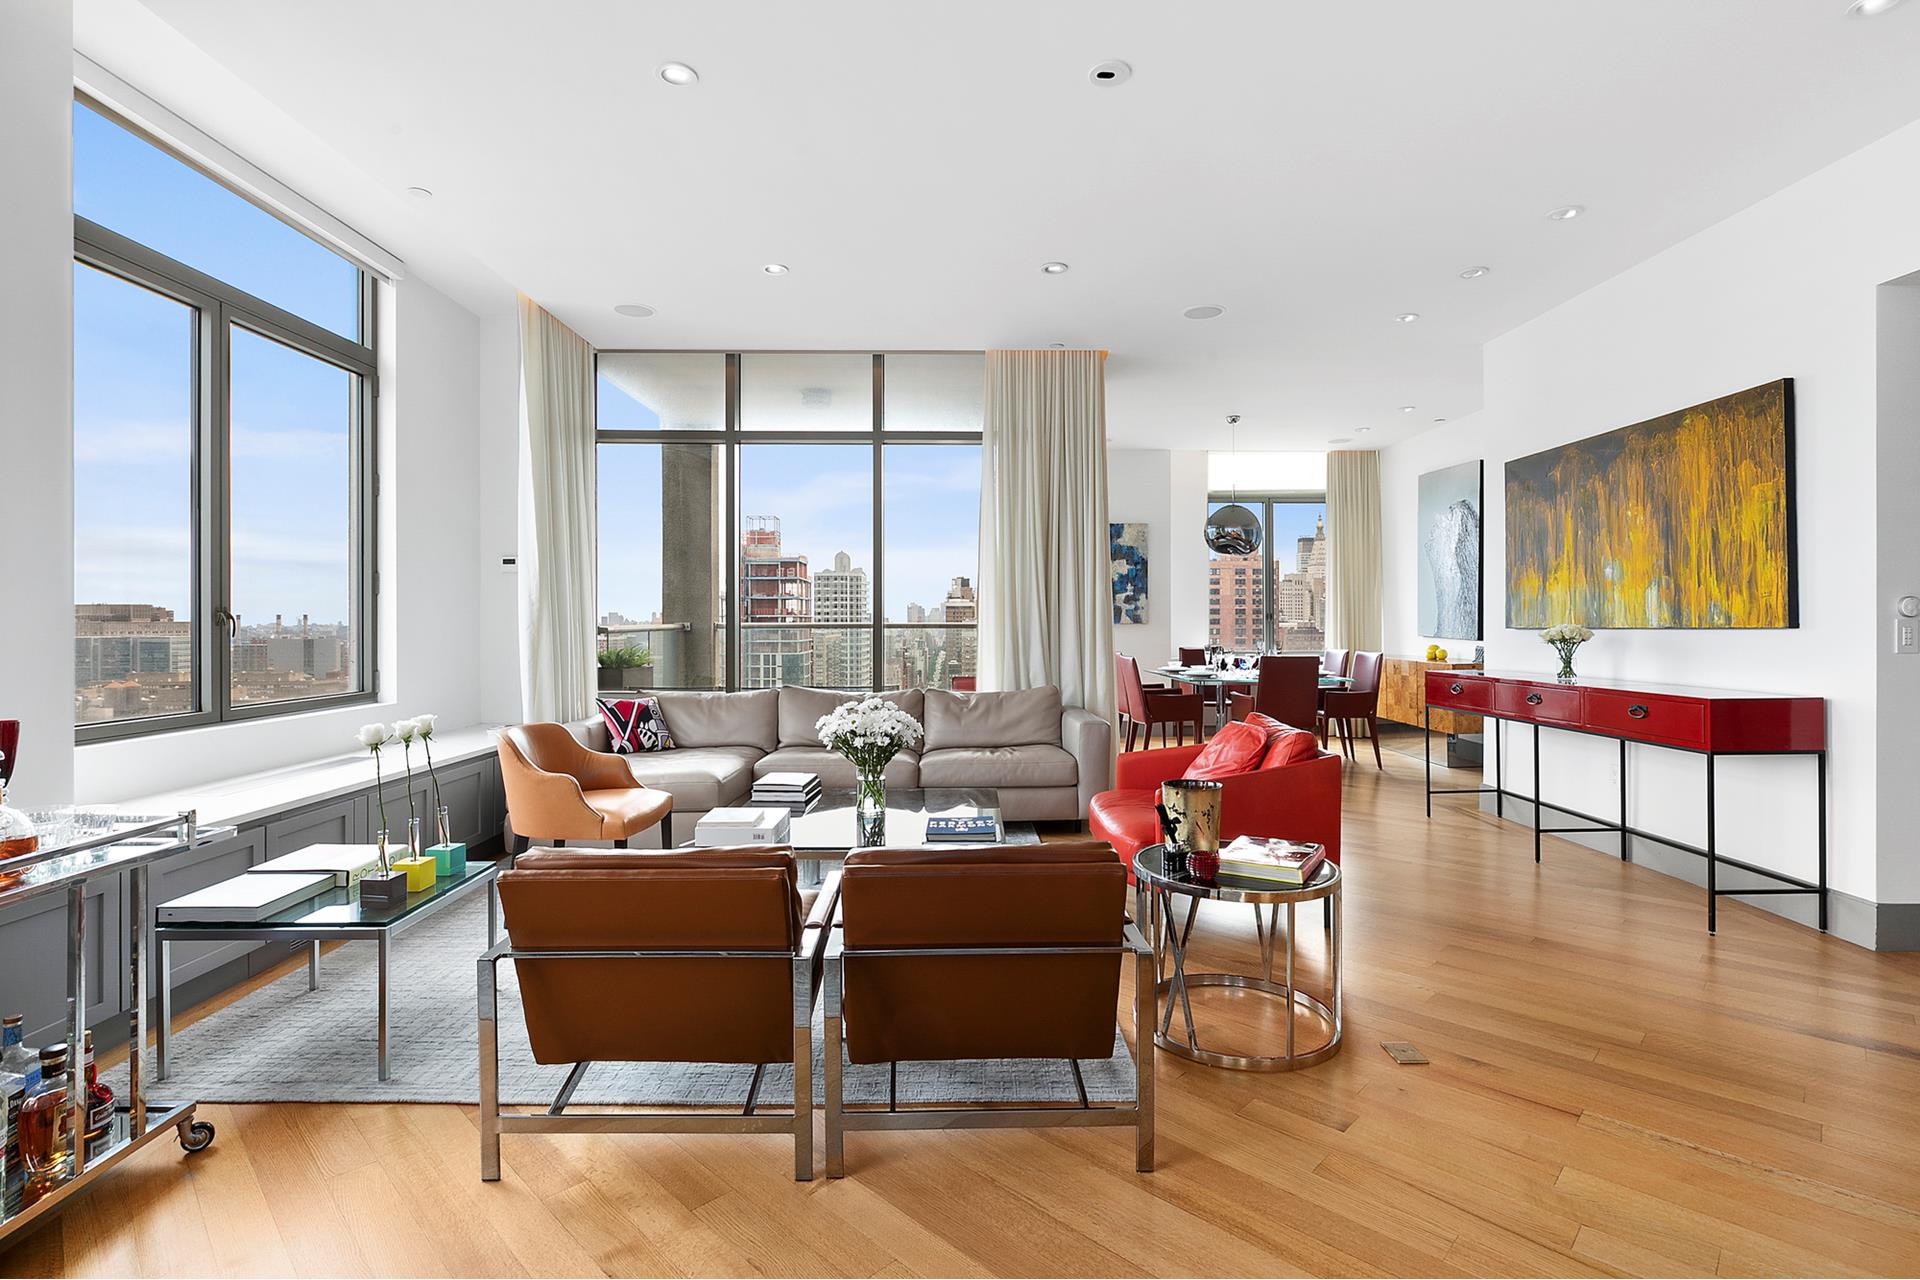 556 3rd Avenue Phd, Murray Hill, Midtown East, NYC - 4 Bedrooms  
4.5 Bathrooms  
8 Rooms - 